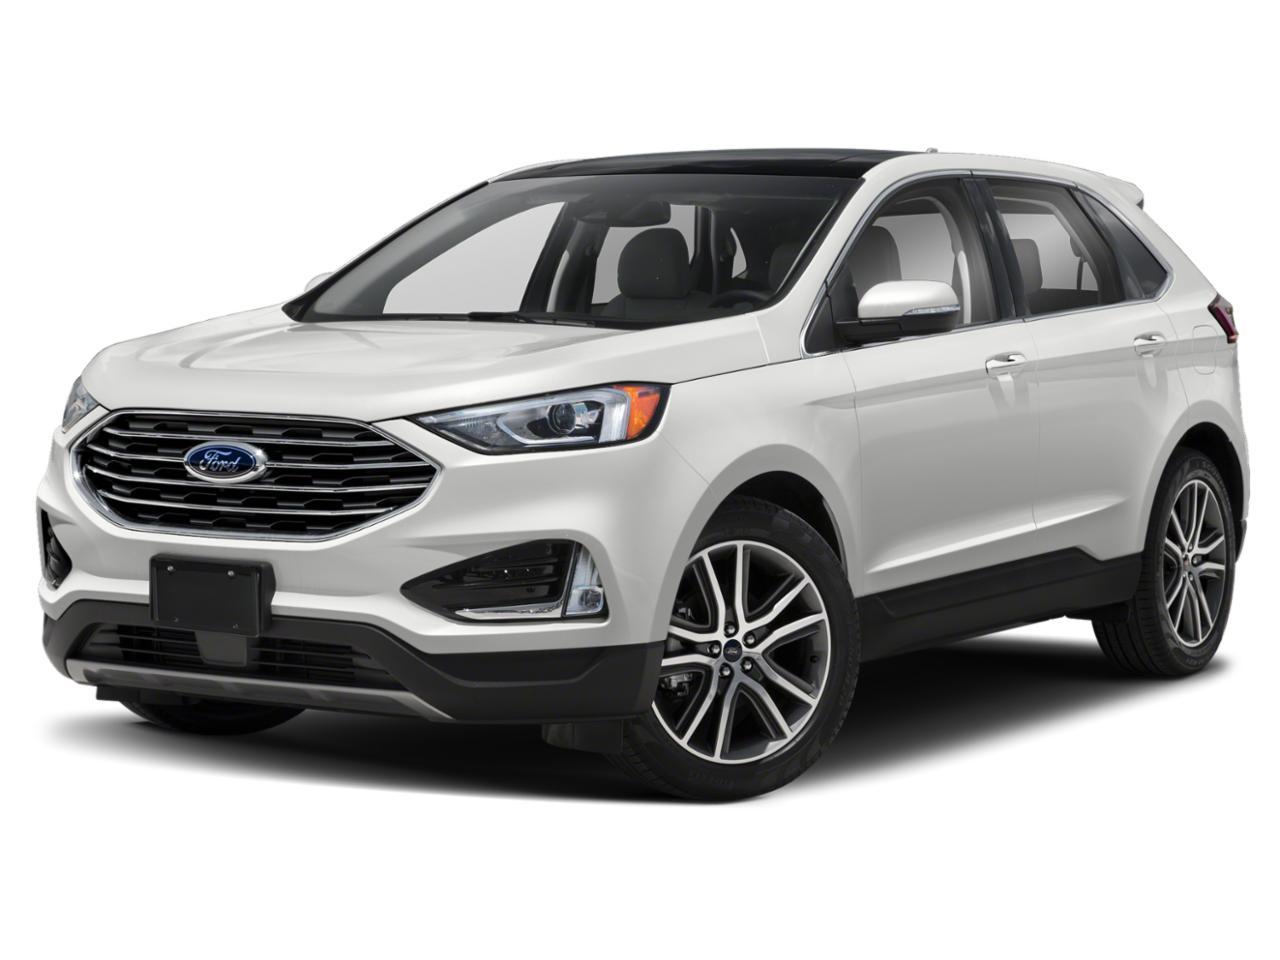 2019 Ford Edge Vehicle Photo in Forest Park, IL 60130